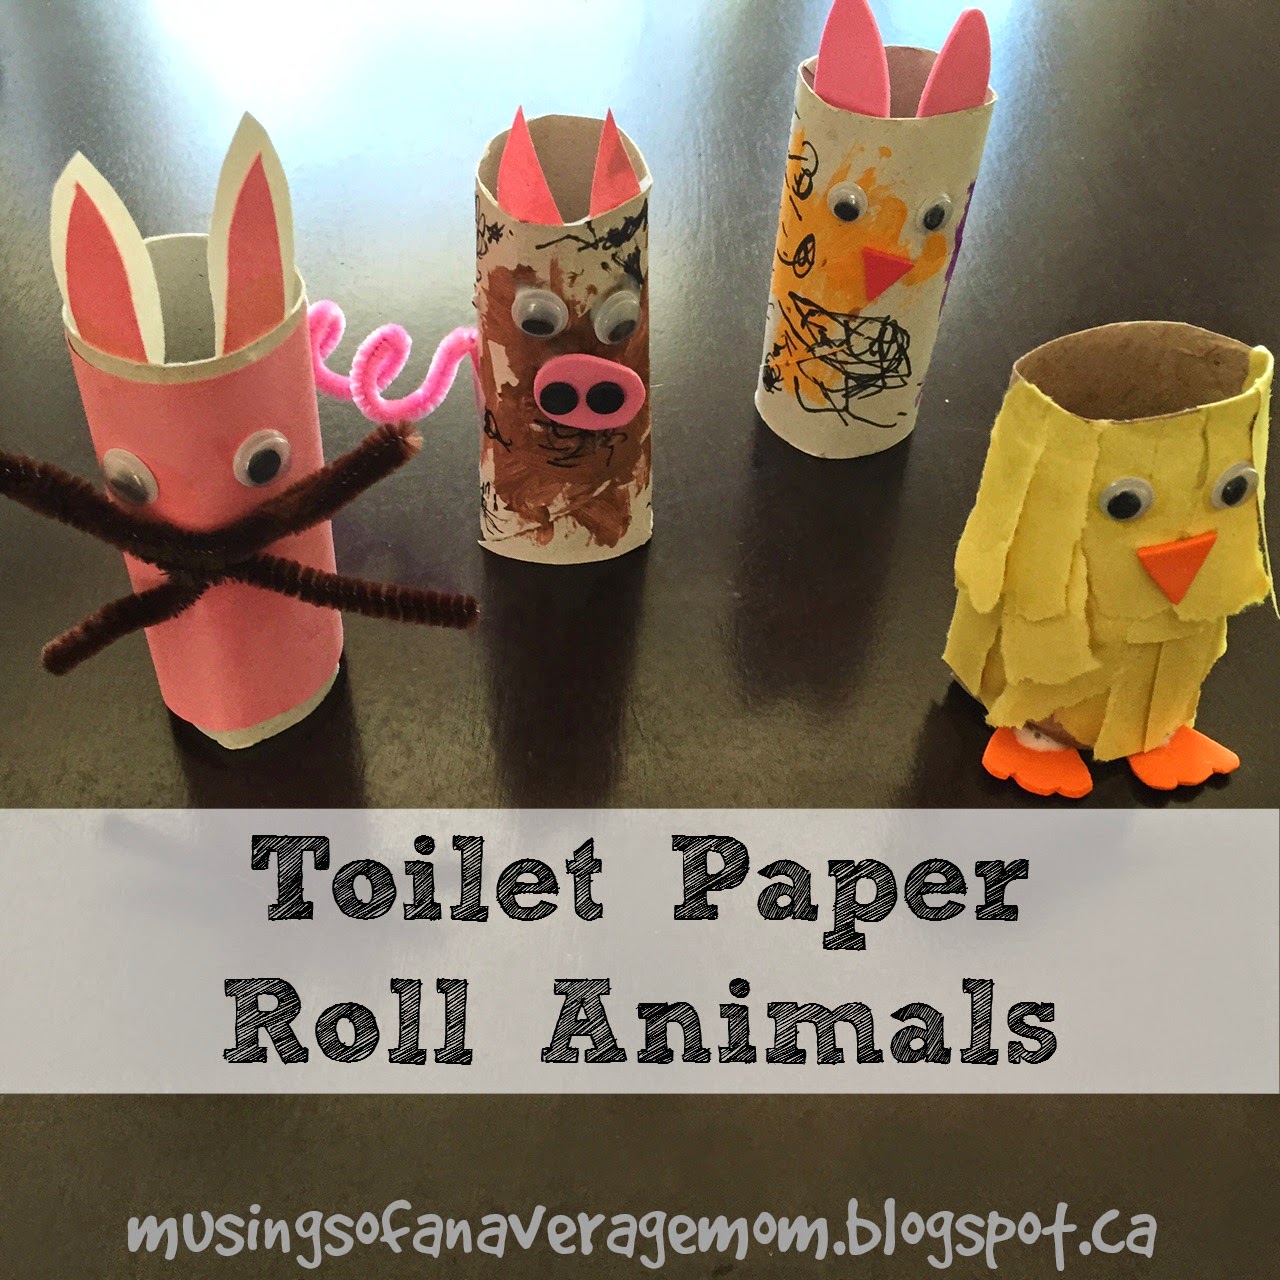 Musings of an Average Mom: Toilet Paper Roll Animals